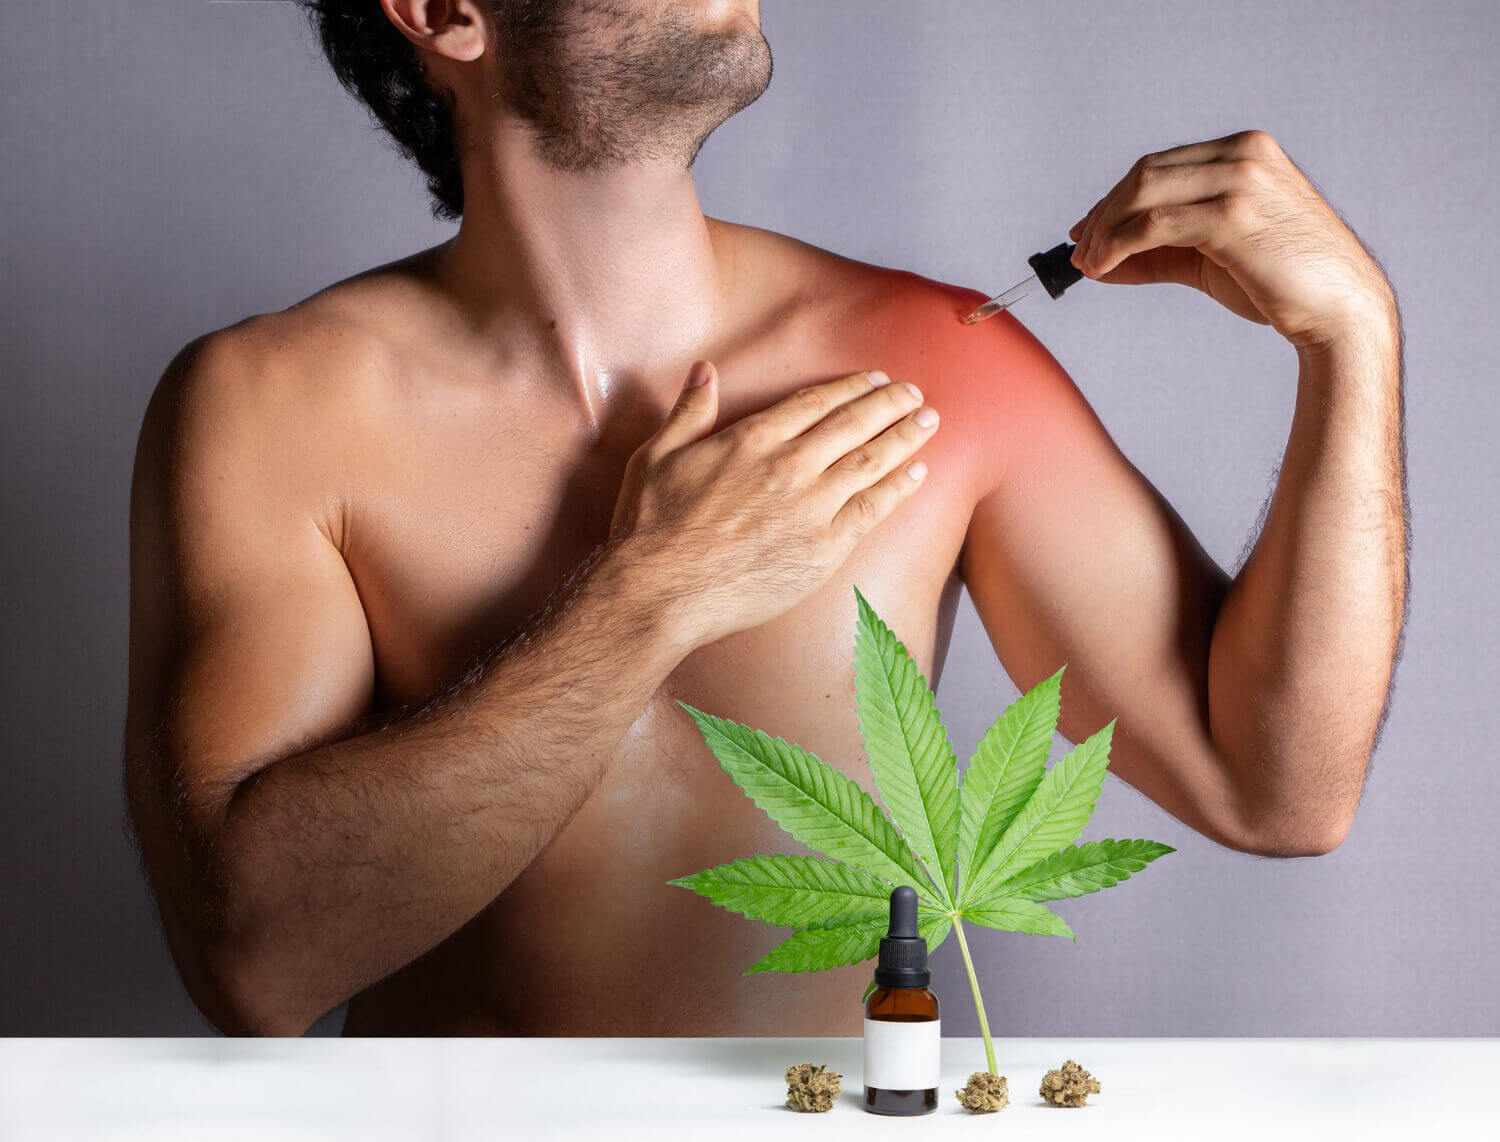 Does CBD reduce inflammation or just pain